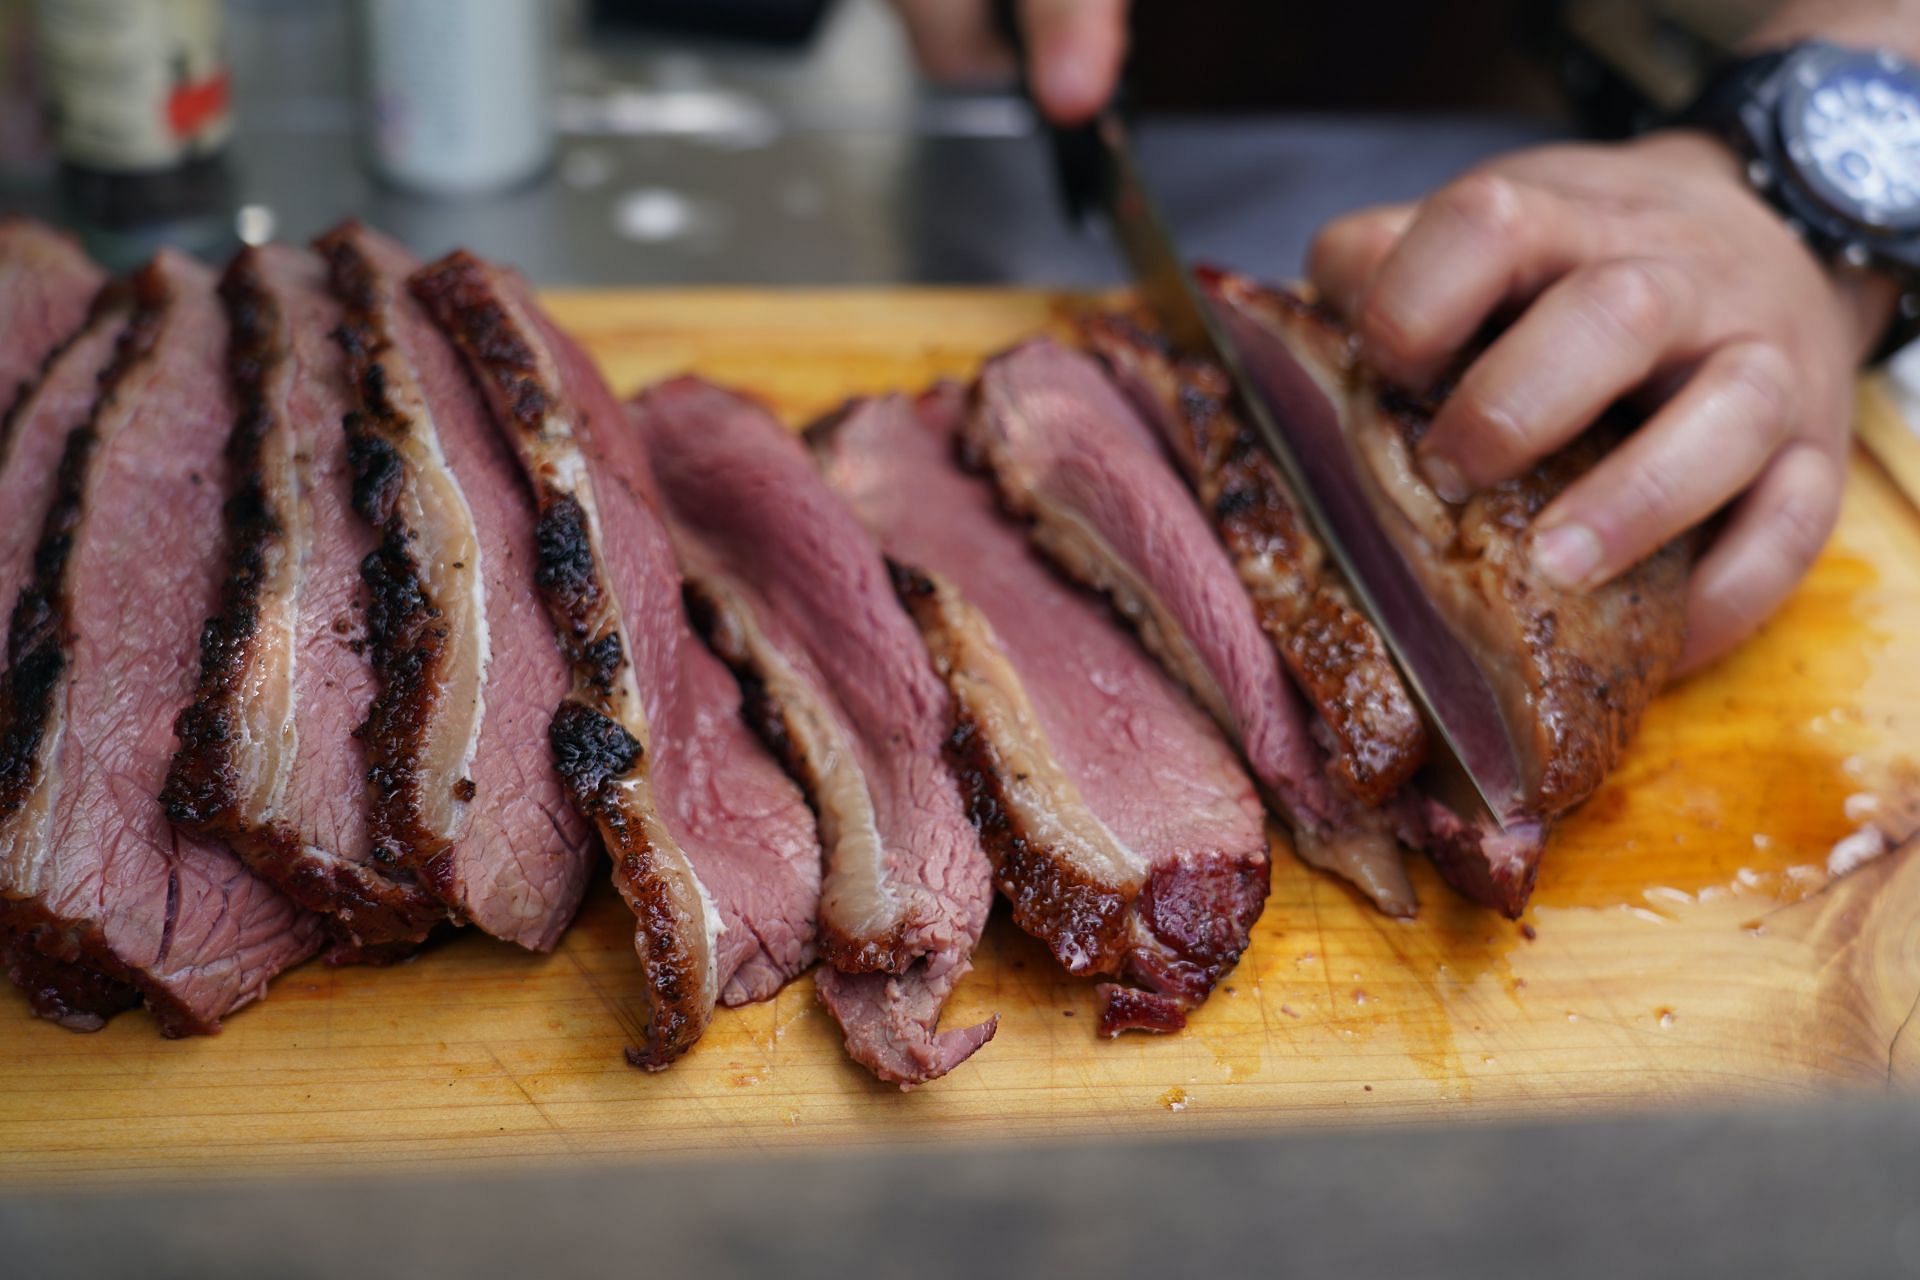 Benefits of meat (image sourced via Pexels / Photo by gil)